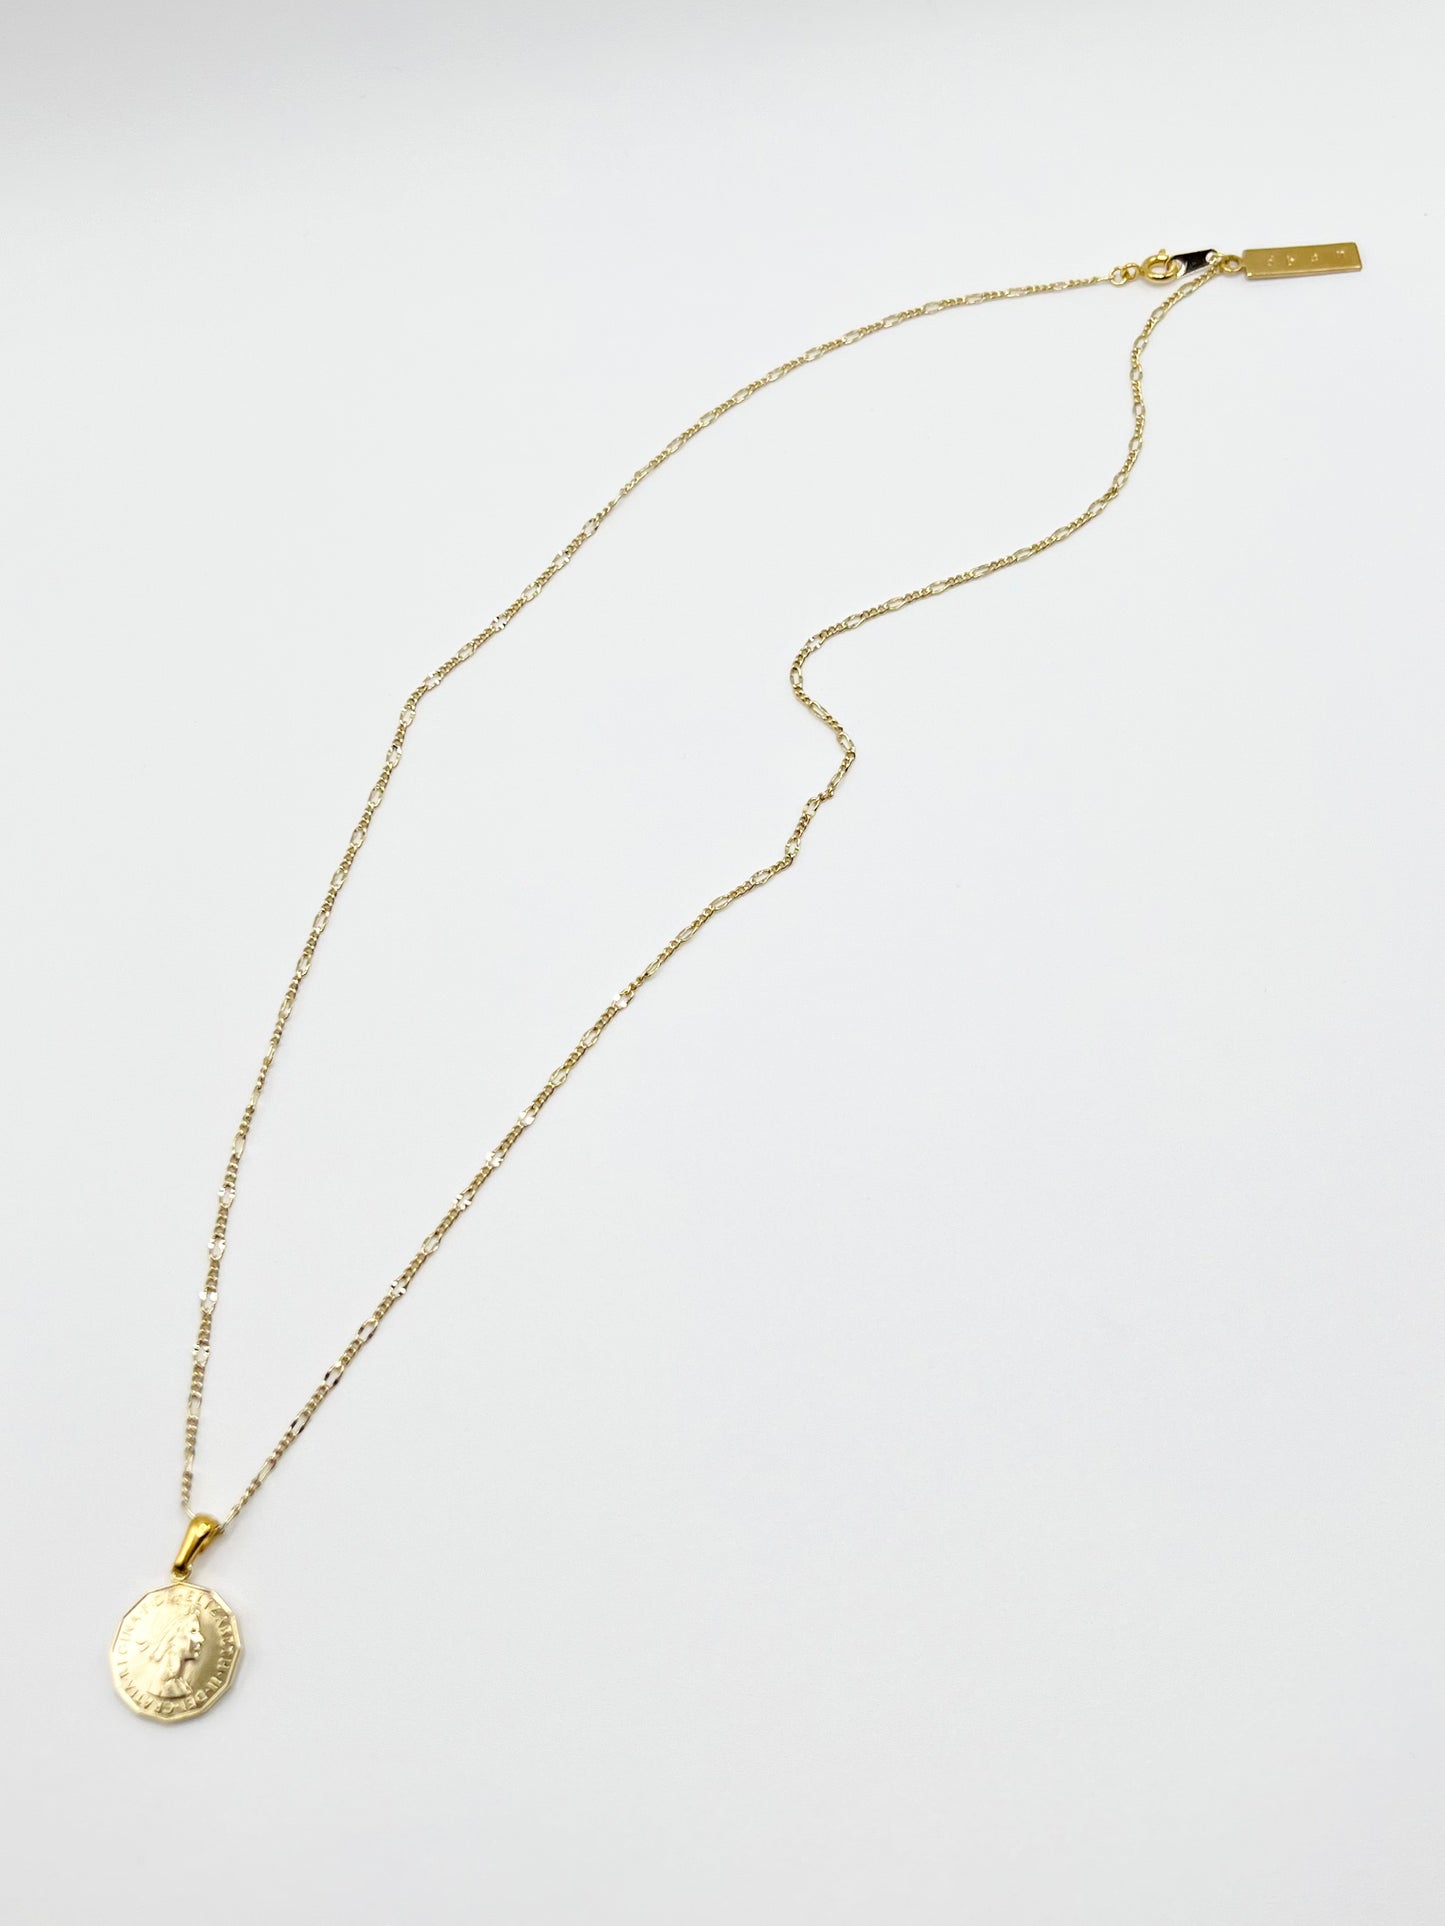 NW coin motif necklace - Gold